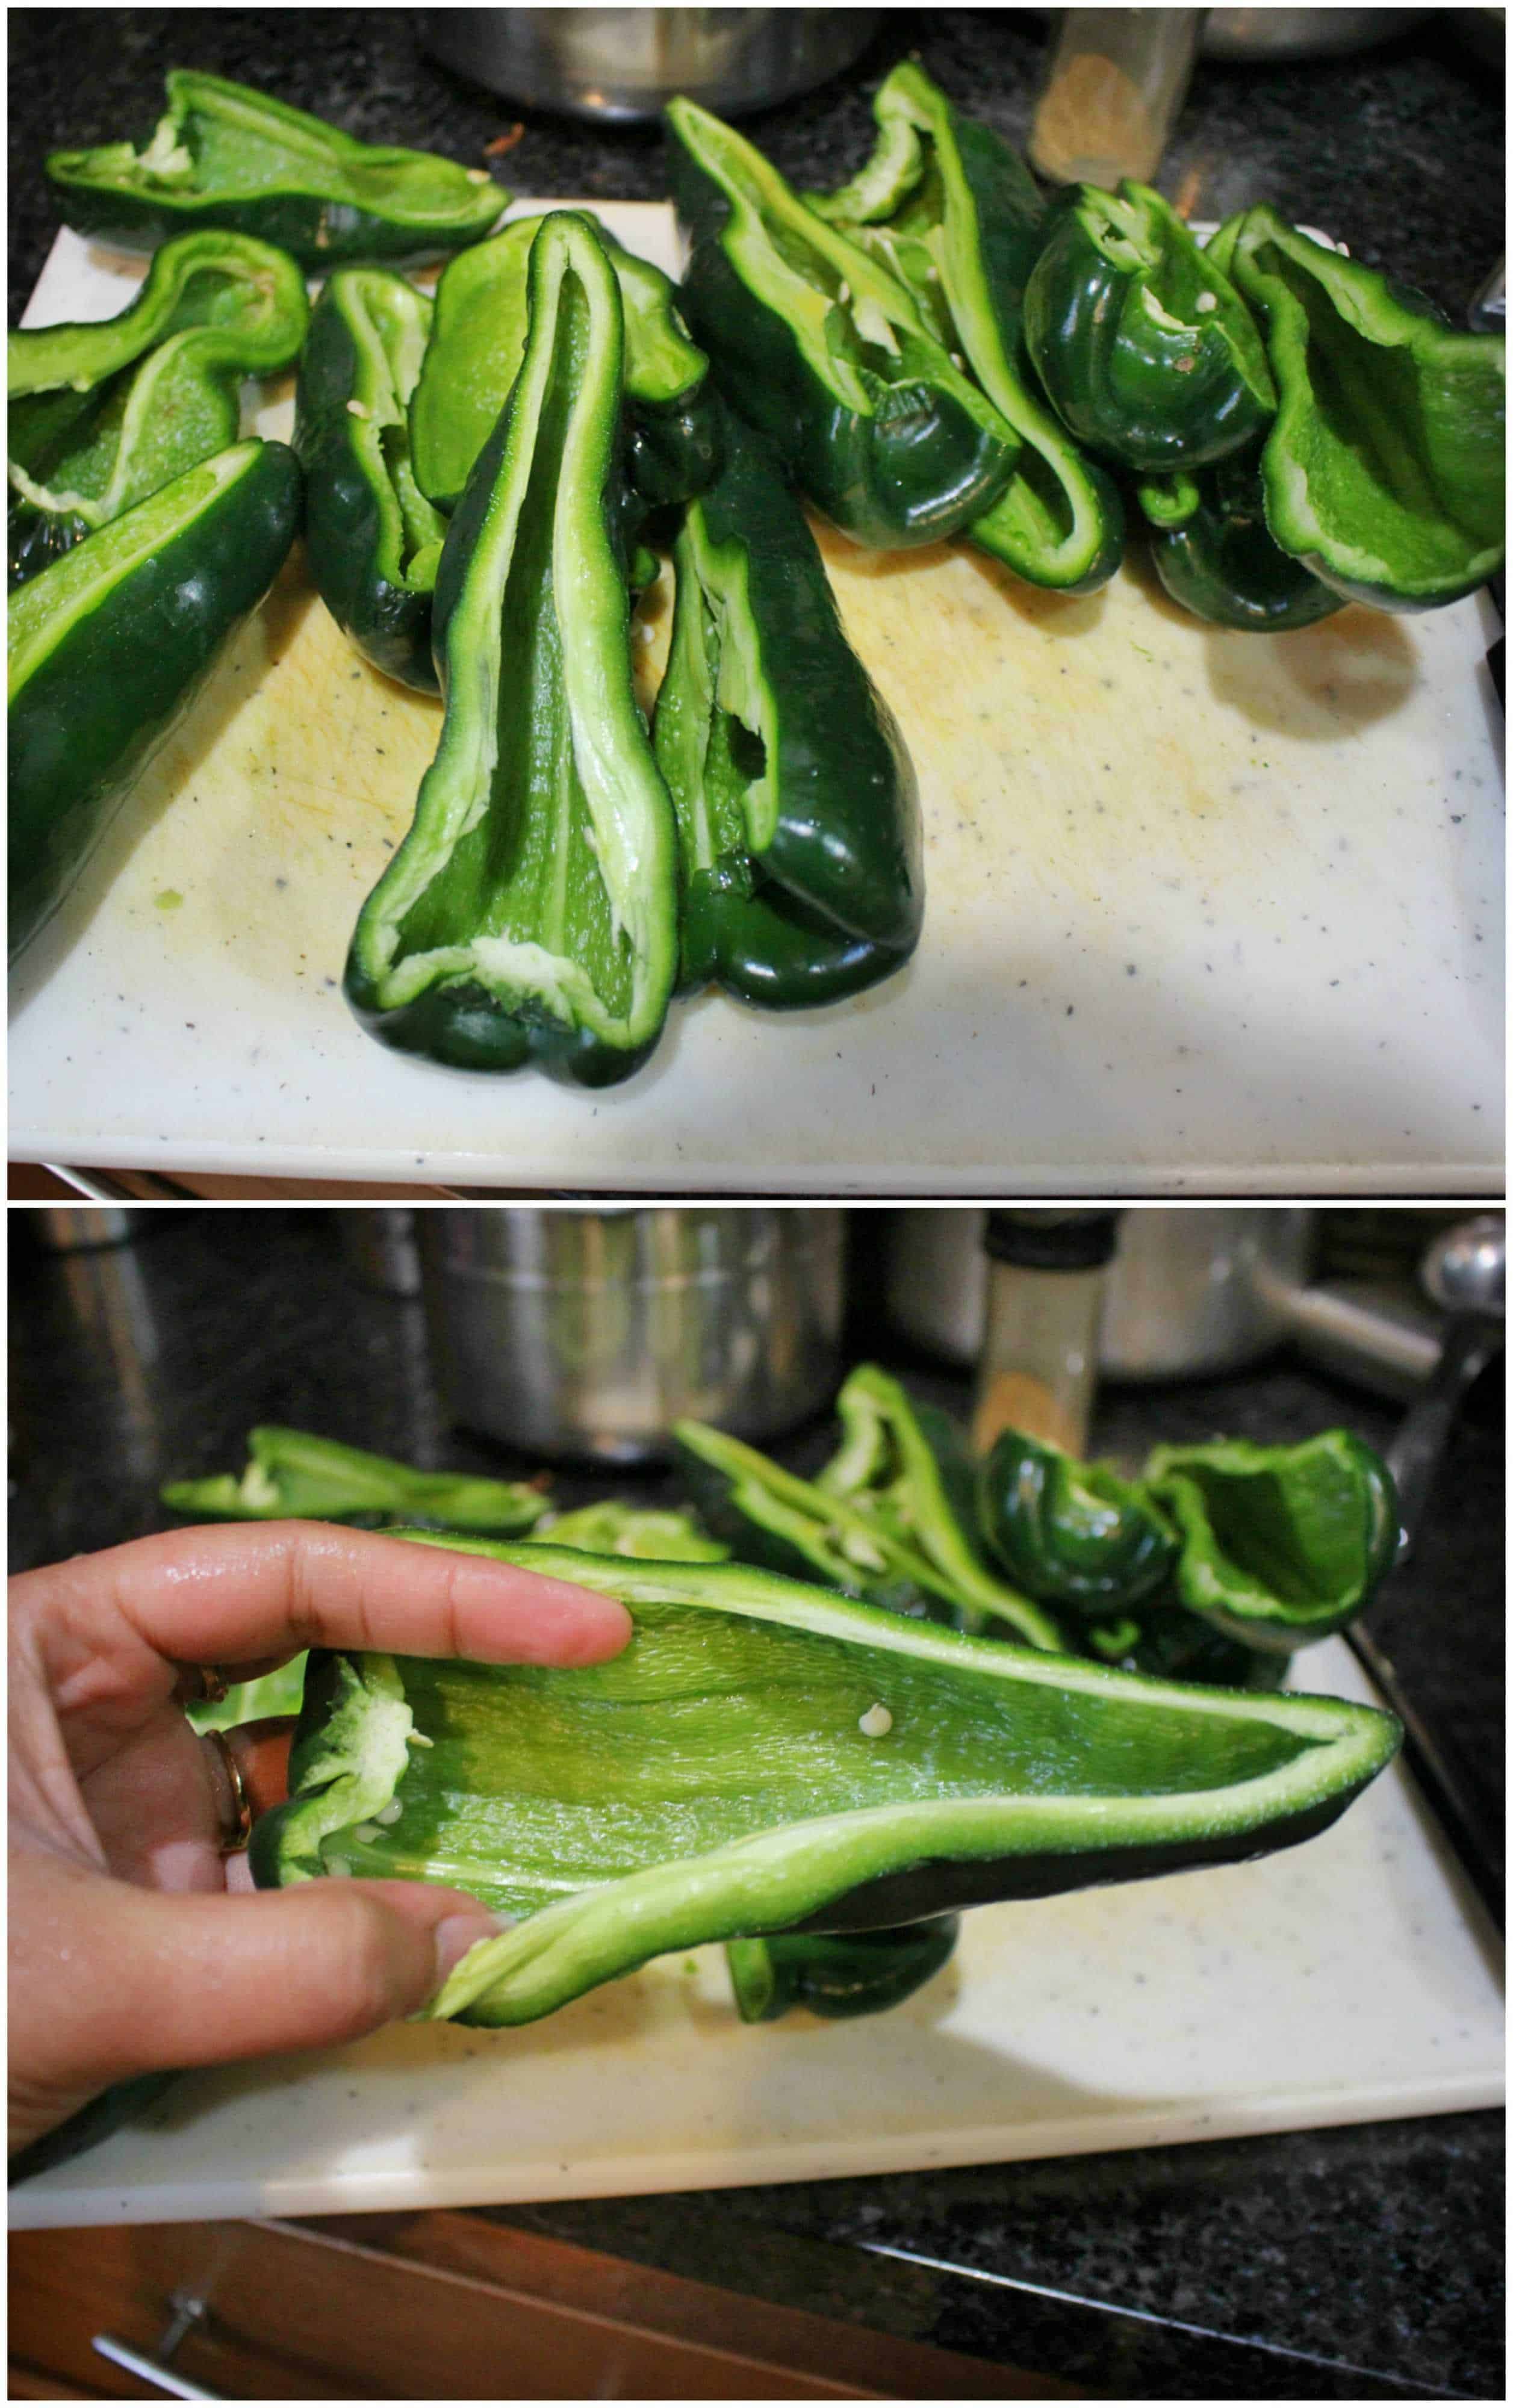 Poblano pepper cut in half and seeds removed